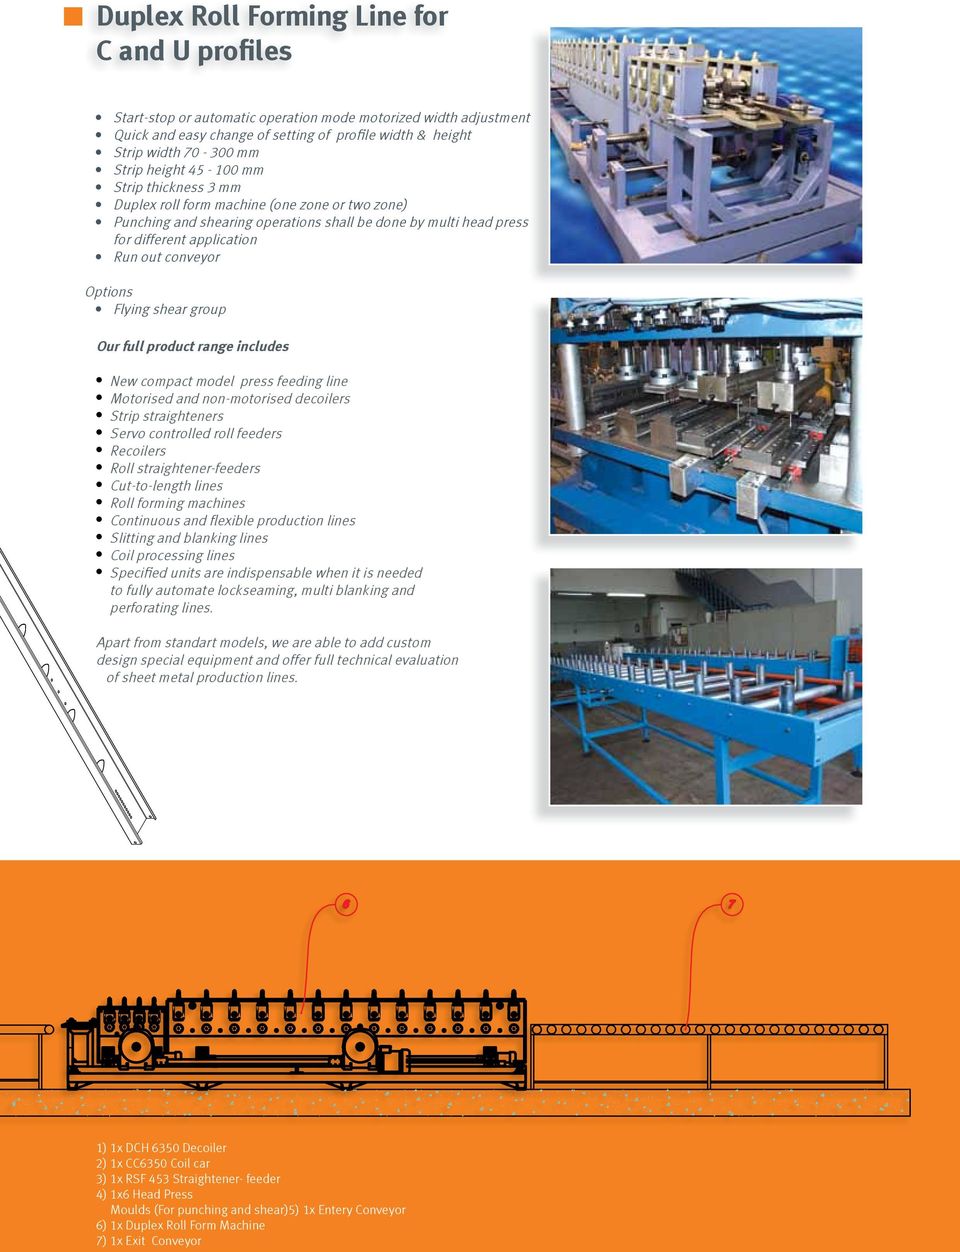 shearing operations shall be done by six multi head press head for different pres in different application areas Run uot out conveyor Options: Shearing Flying shear Group group Our full product range